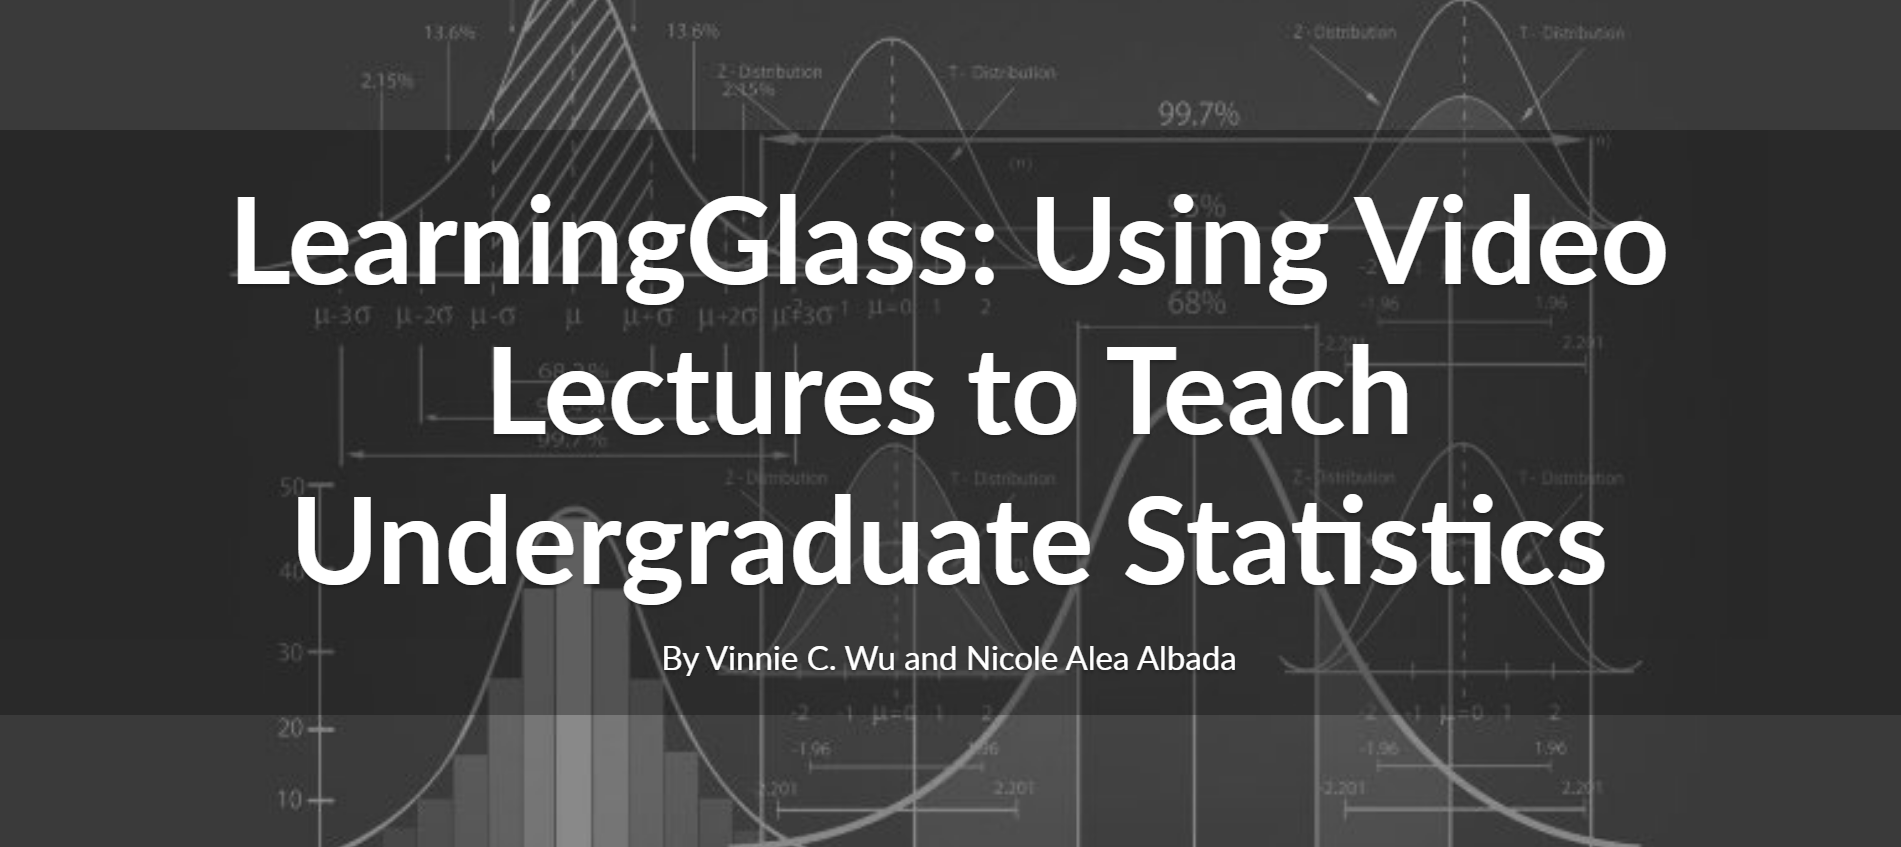 Showcase Image for Vinnie C. Wu and Nicole Alea Albada: Learning Glass - Using video lectures to teach statistics